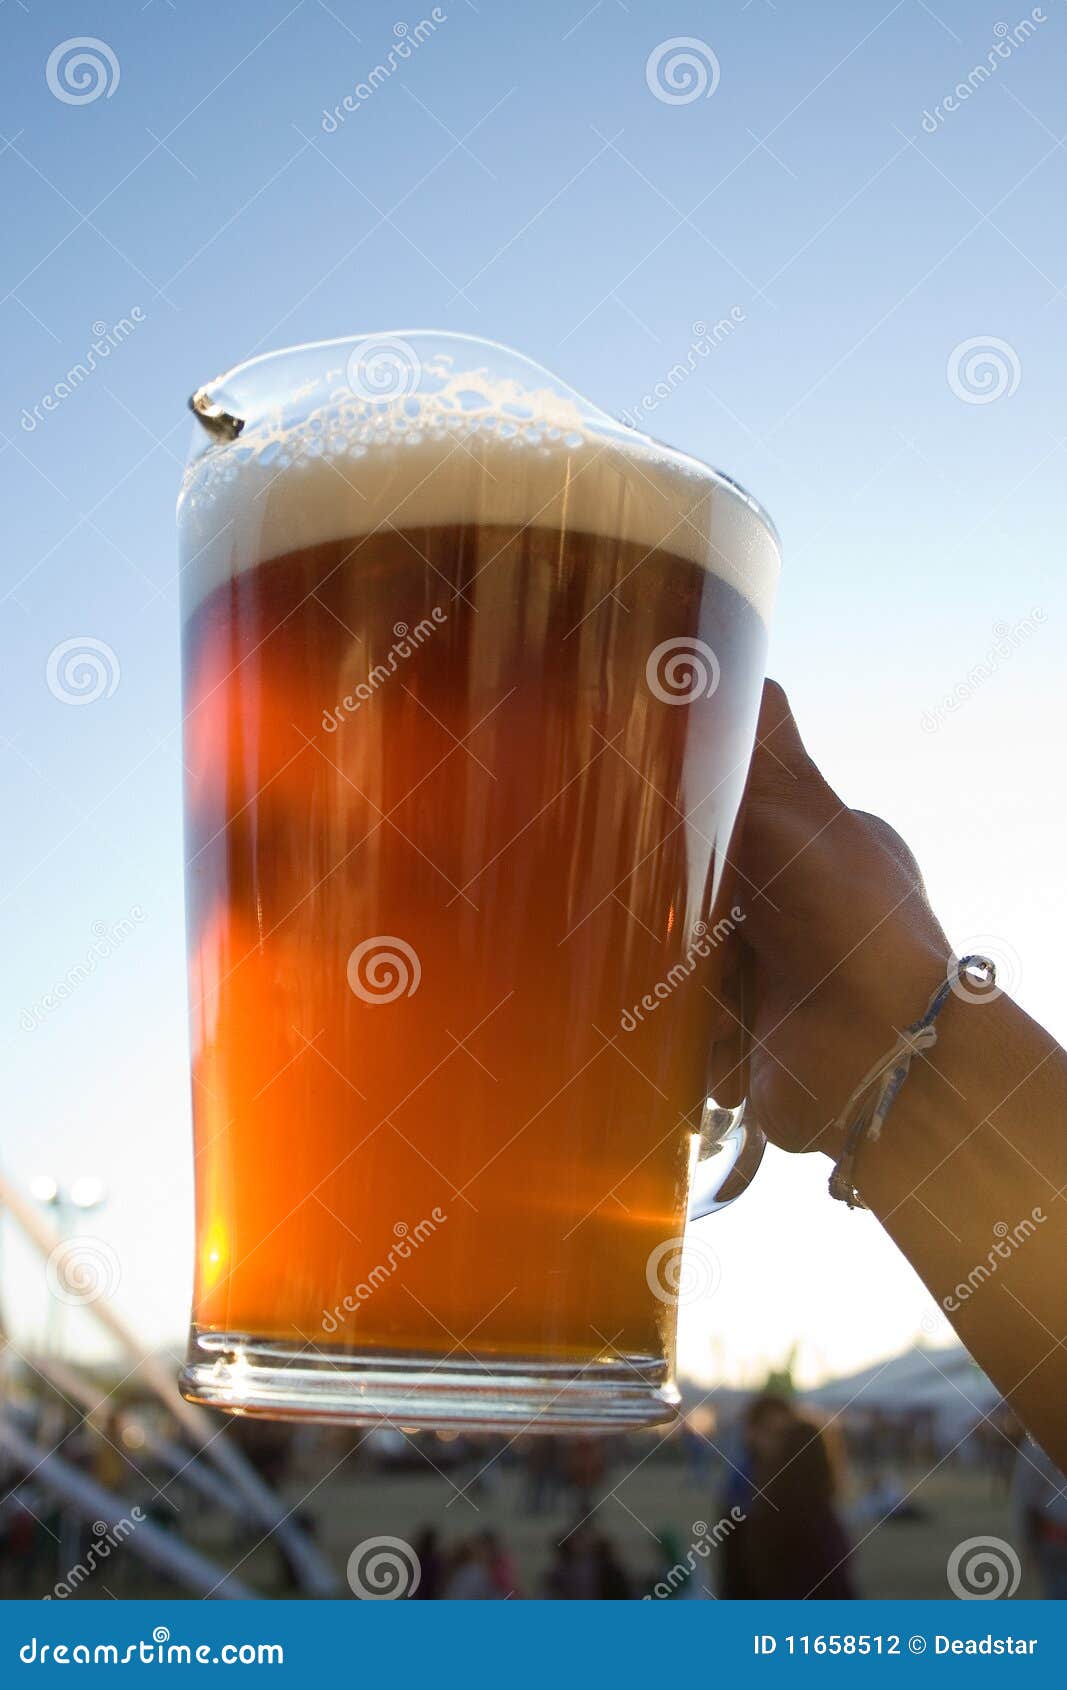 Pitcher of beer stock photo. Image of cold, alcoholism - 11658512